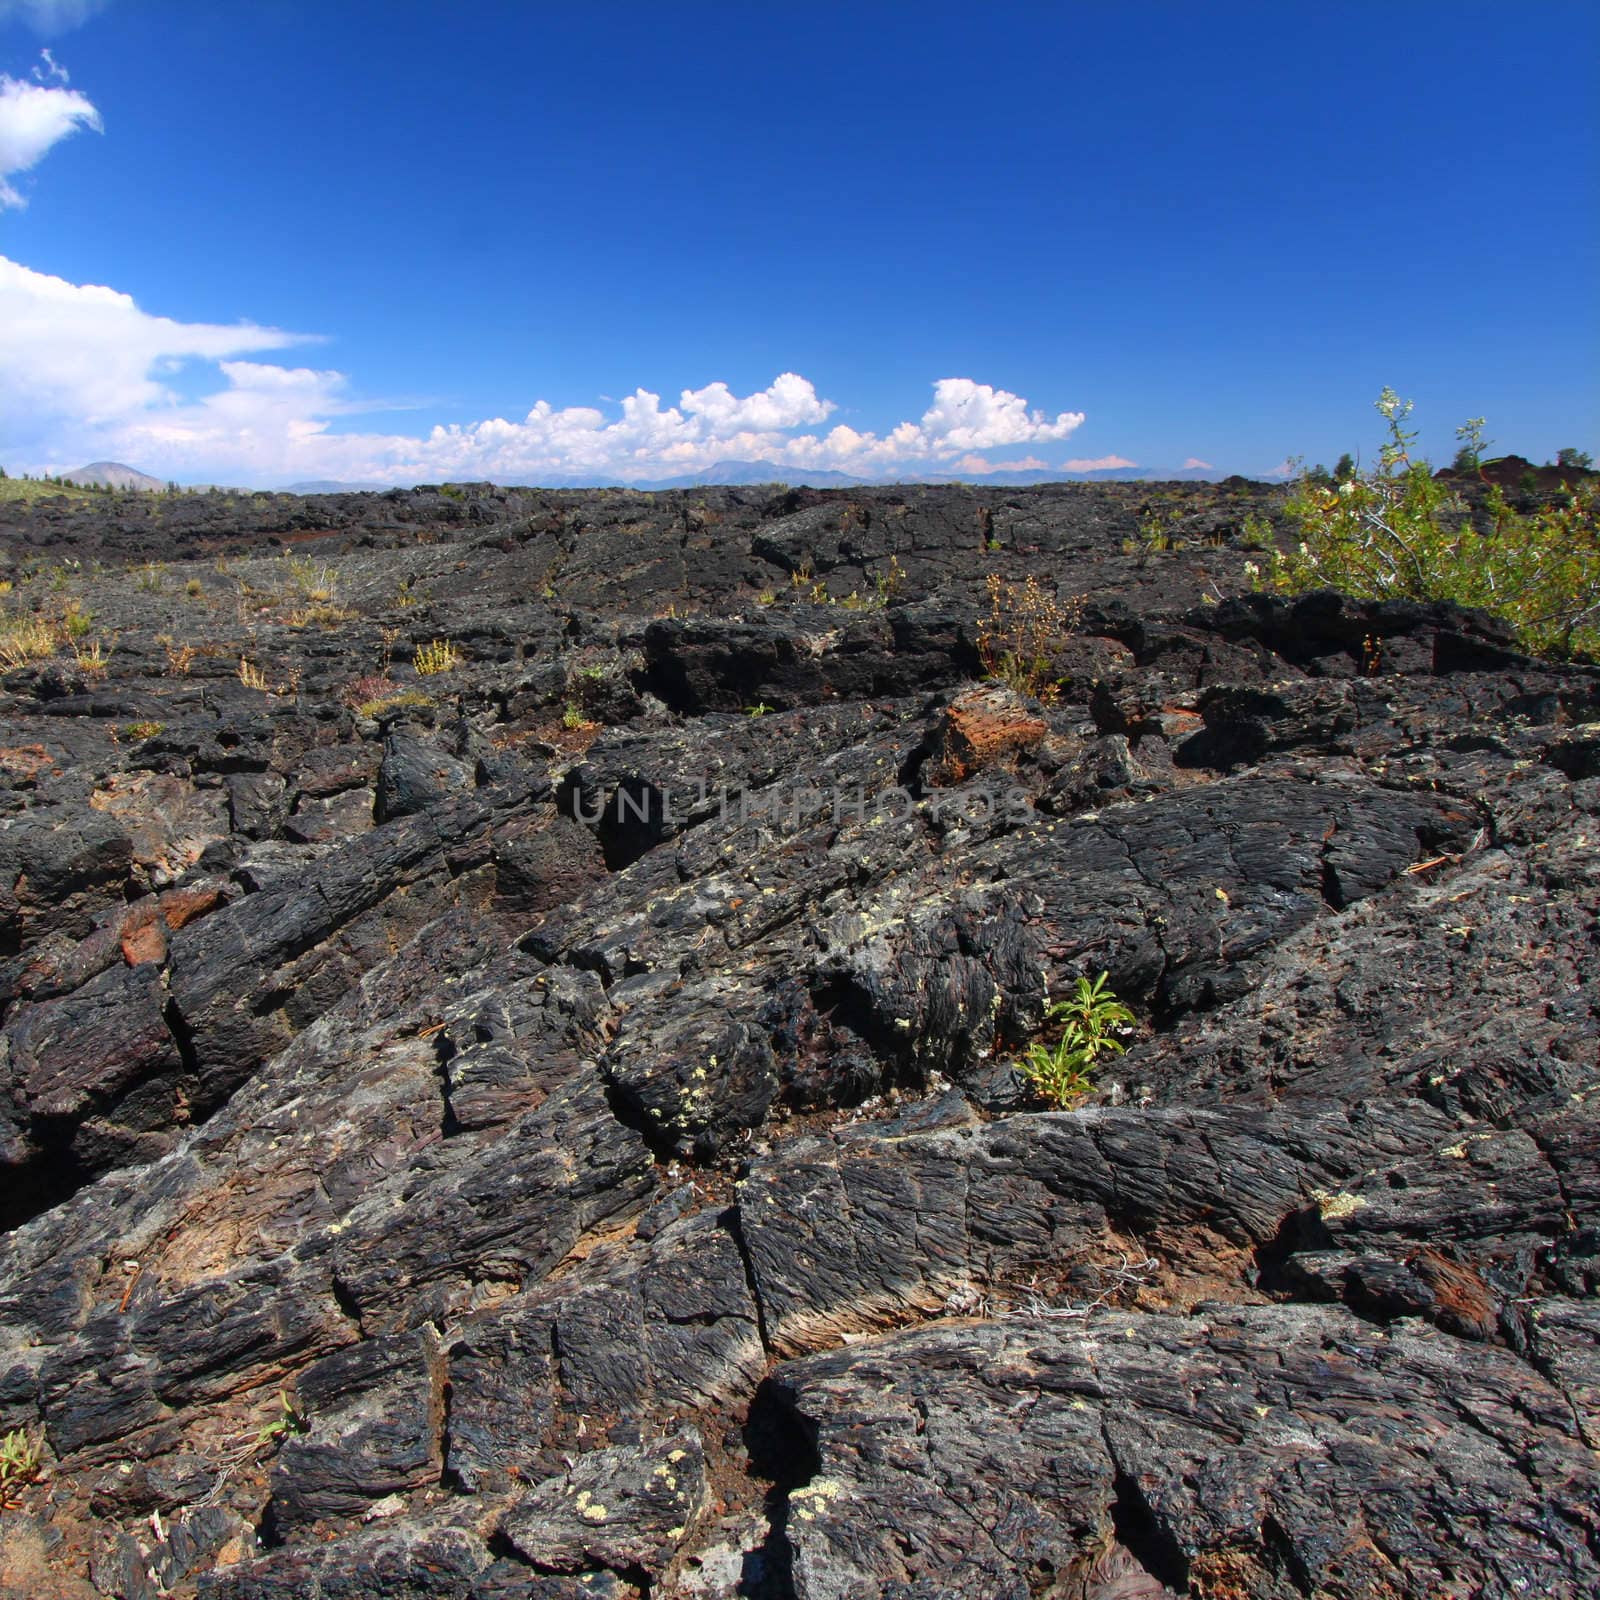 Craters of the Moon Volcanic Landscape by Wirepec